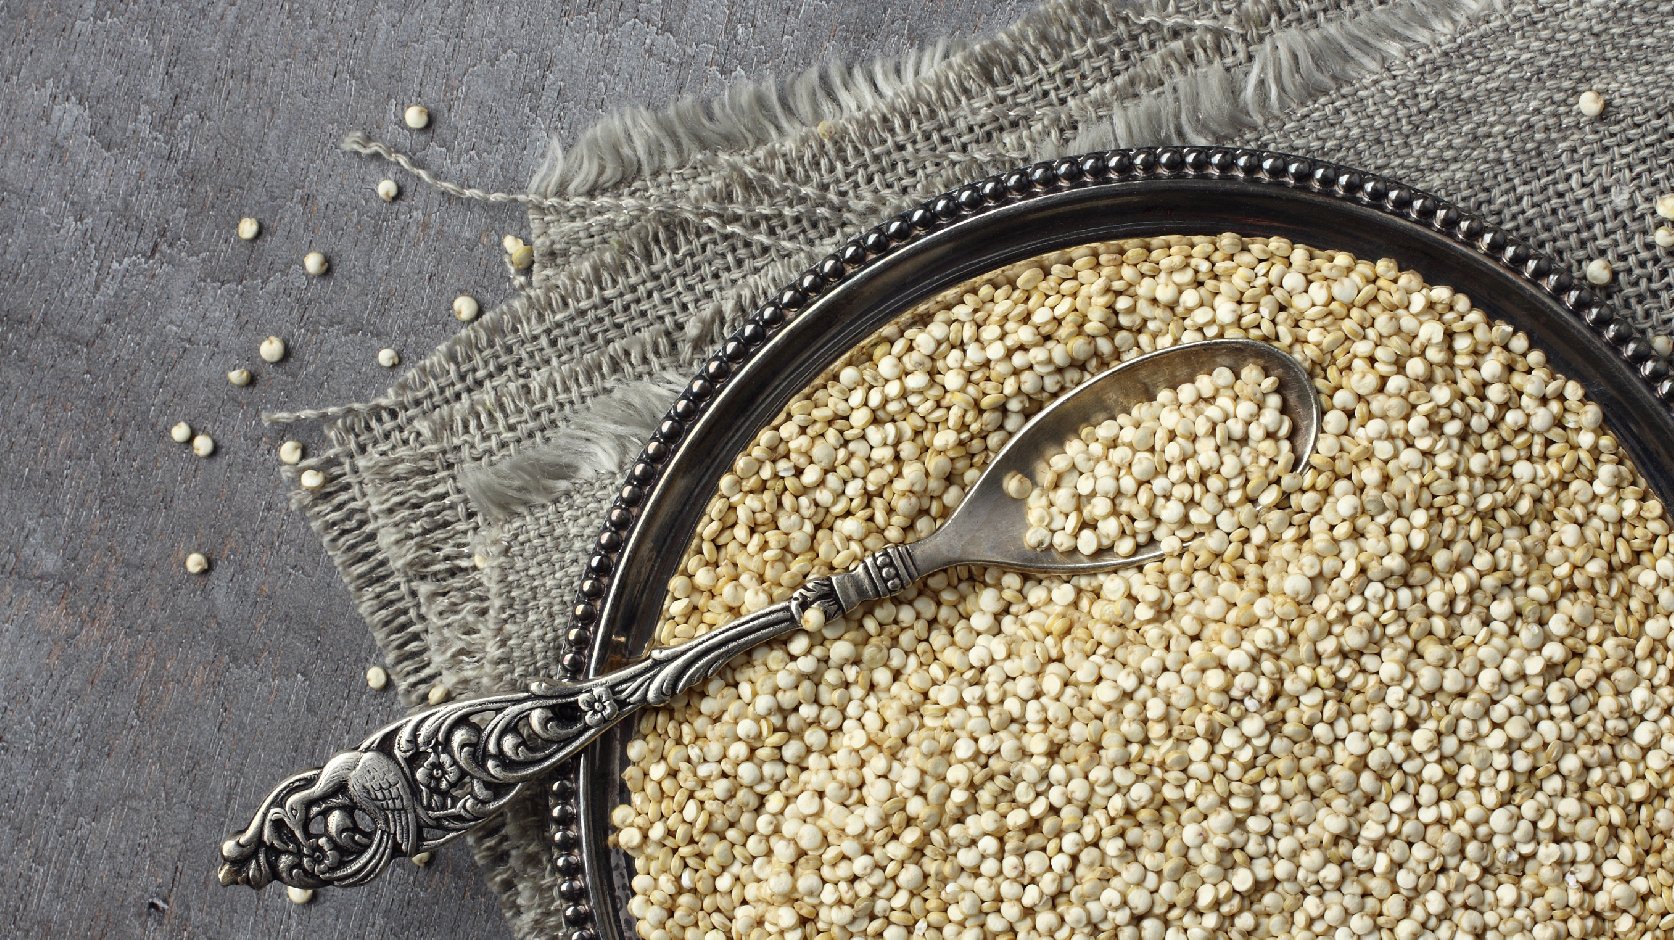 Factories that got the all-clear now produce quinoa that will bear the OU-P symbol, meaning they're kosher for Passover. Photo: Iryna Melnyk/iStockphoto